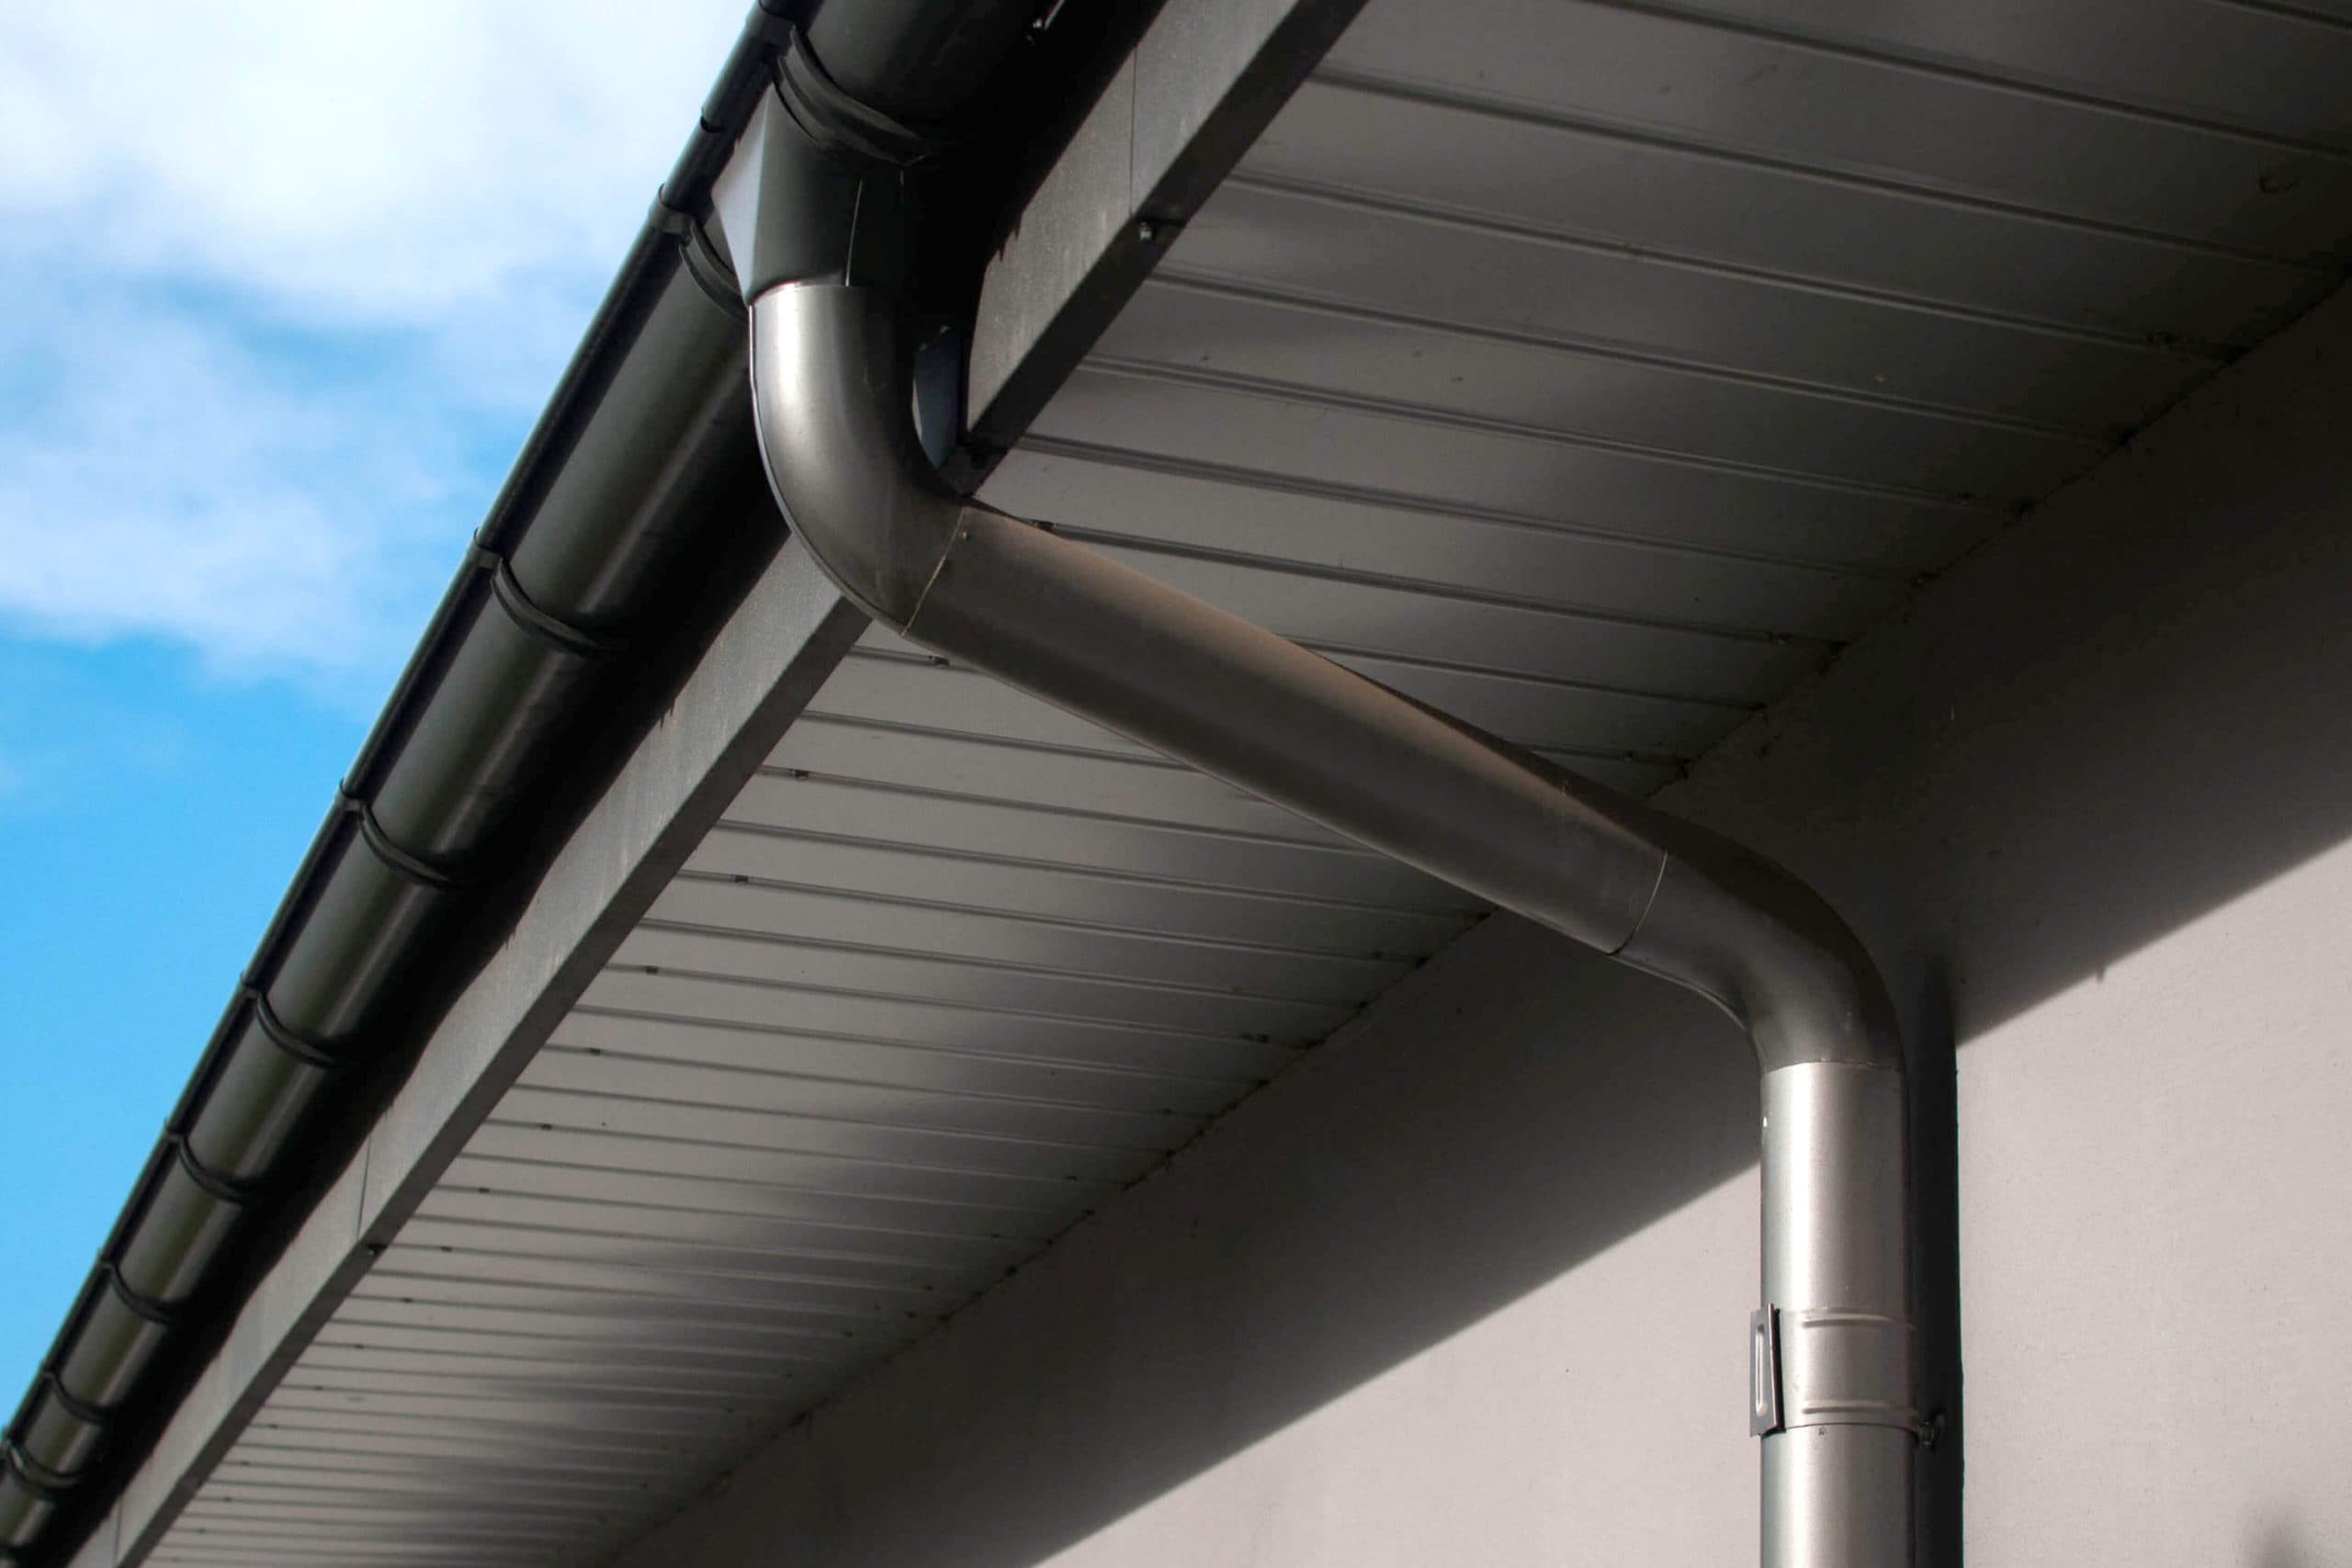 Reliable and affordable Galvanized gutters installation in Hendersonville